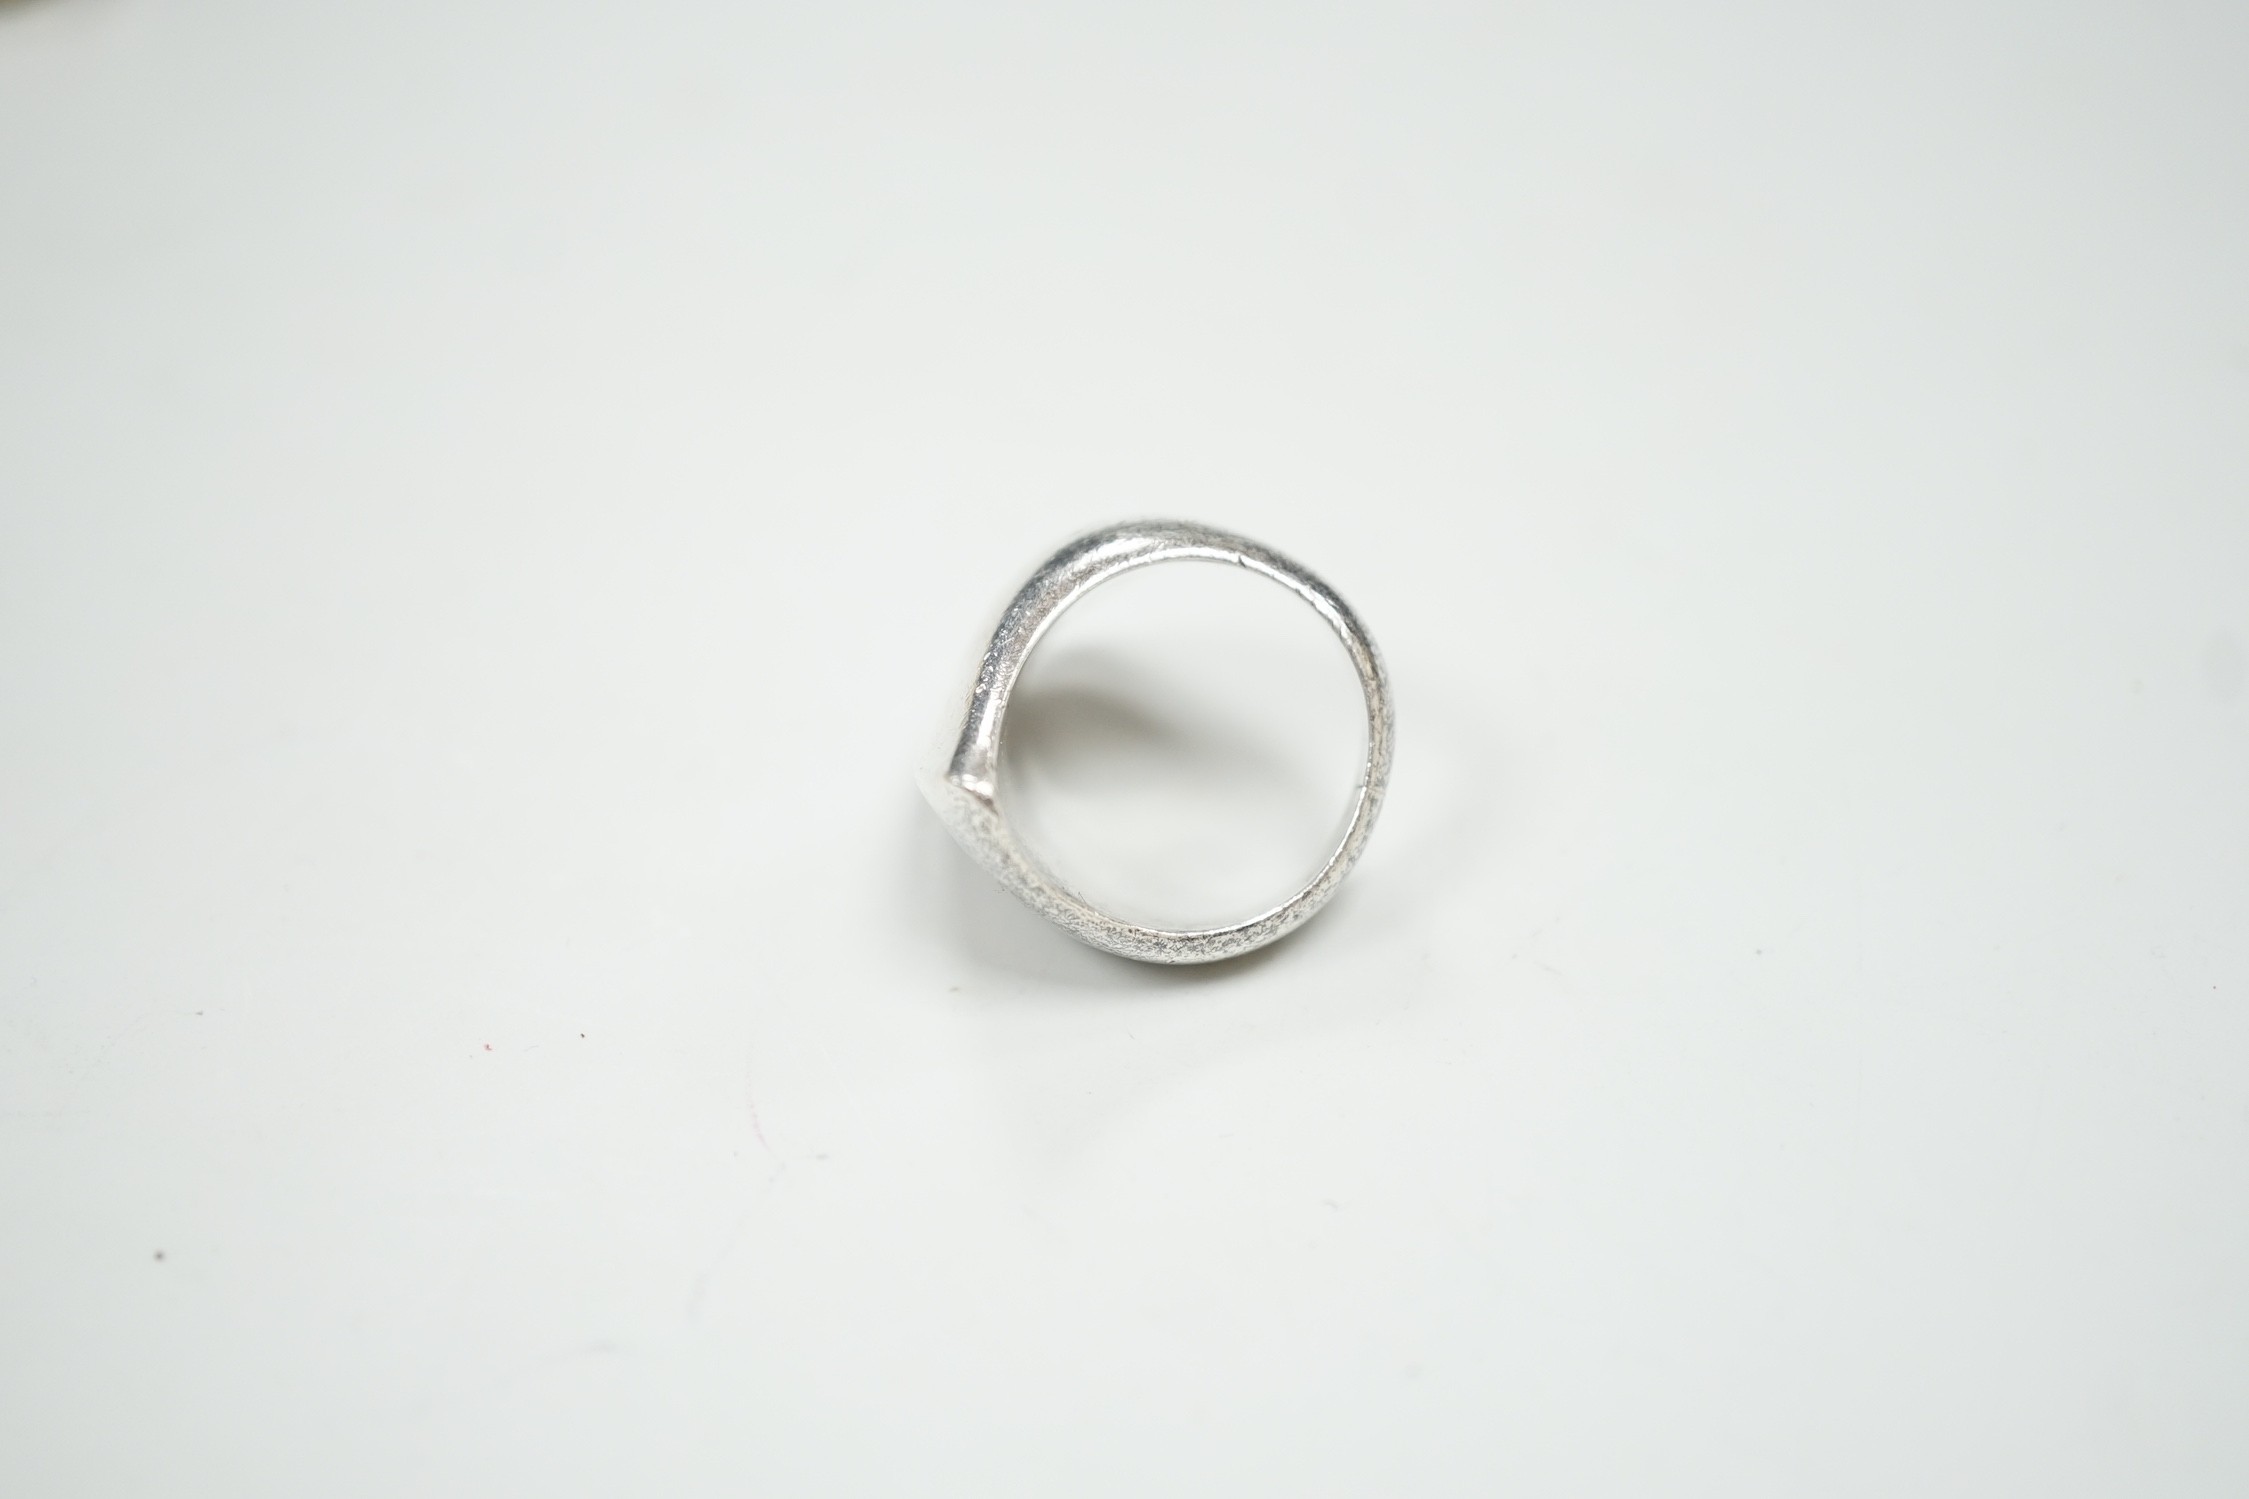 A 1960's Georg Jensen sterling silver dress ring, design no. 90, London import marks for 1966, size N/O.